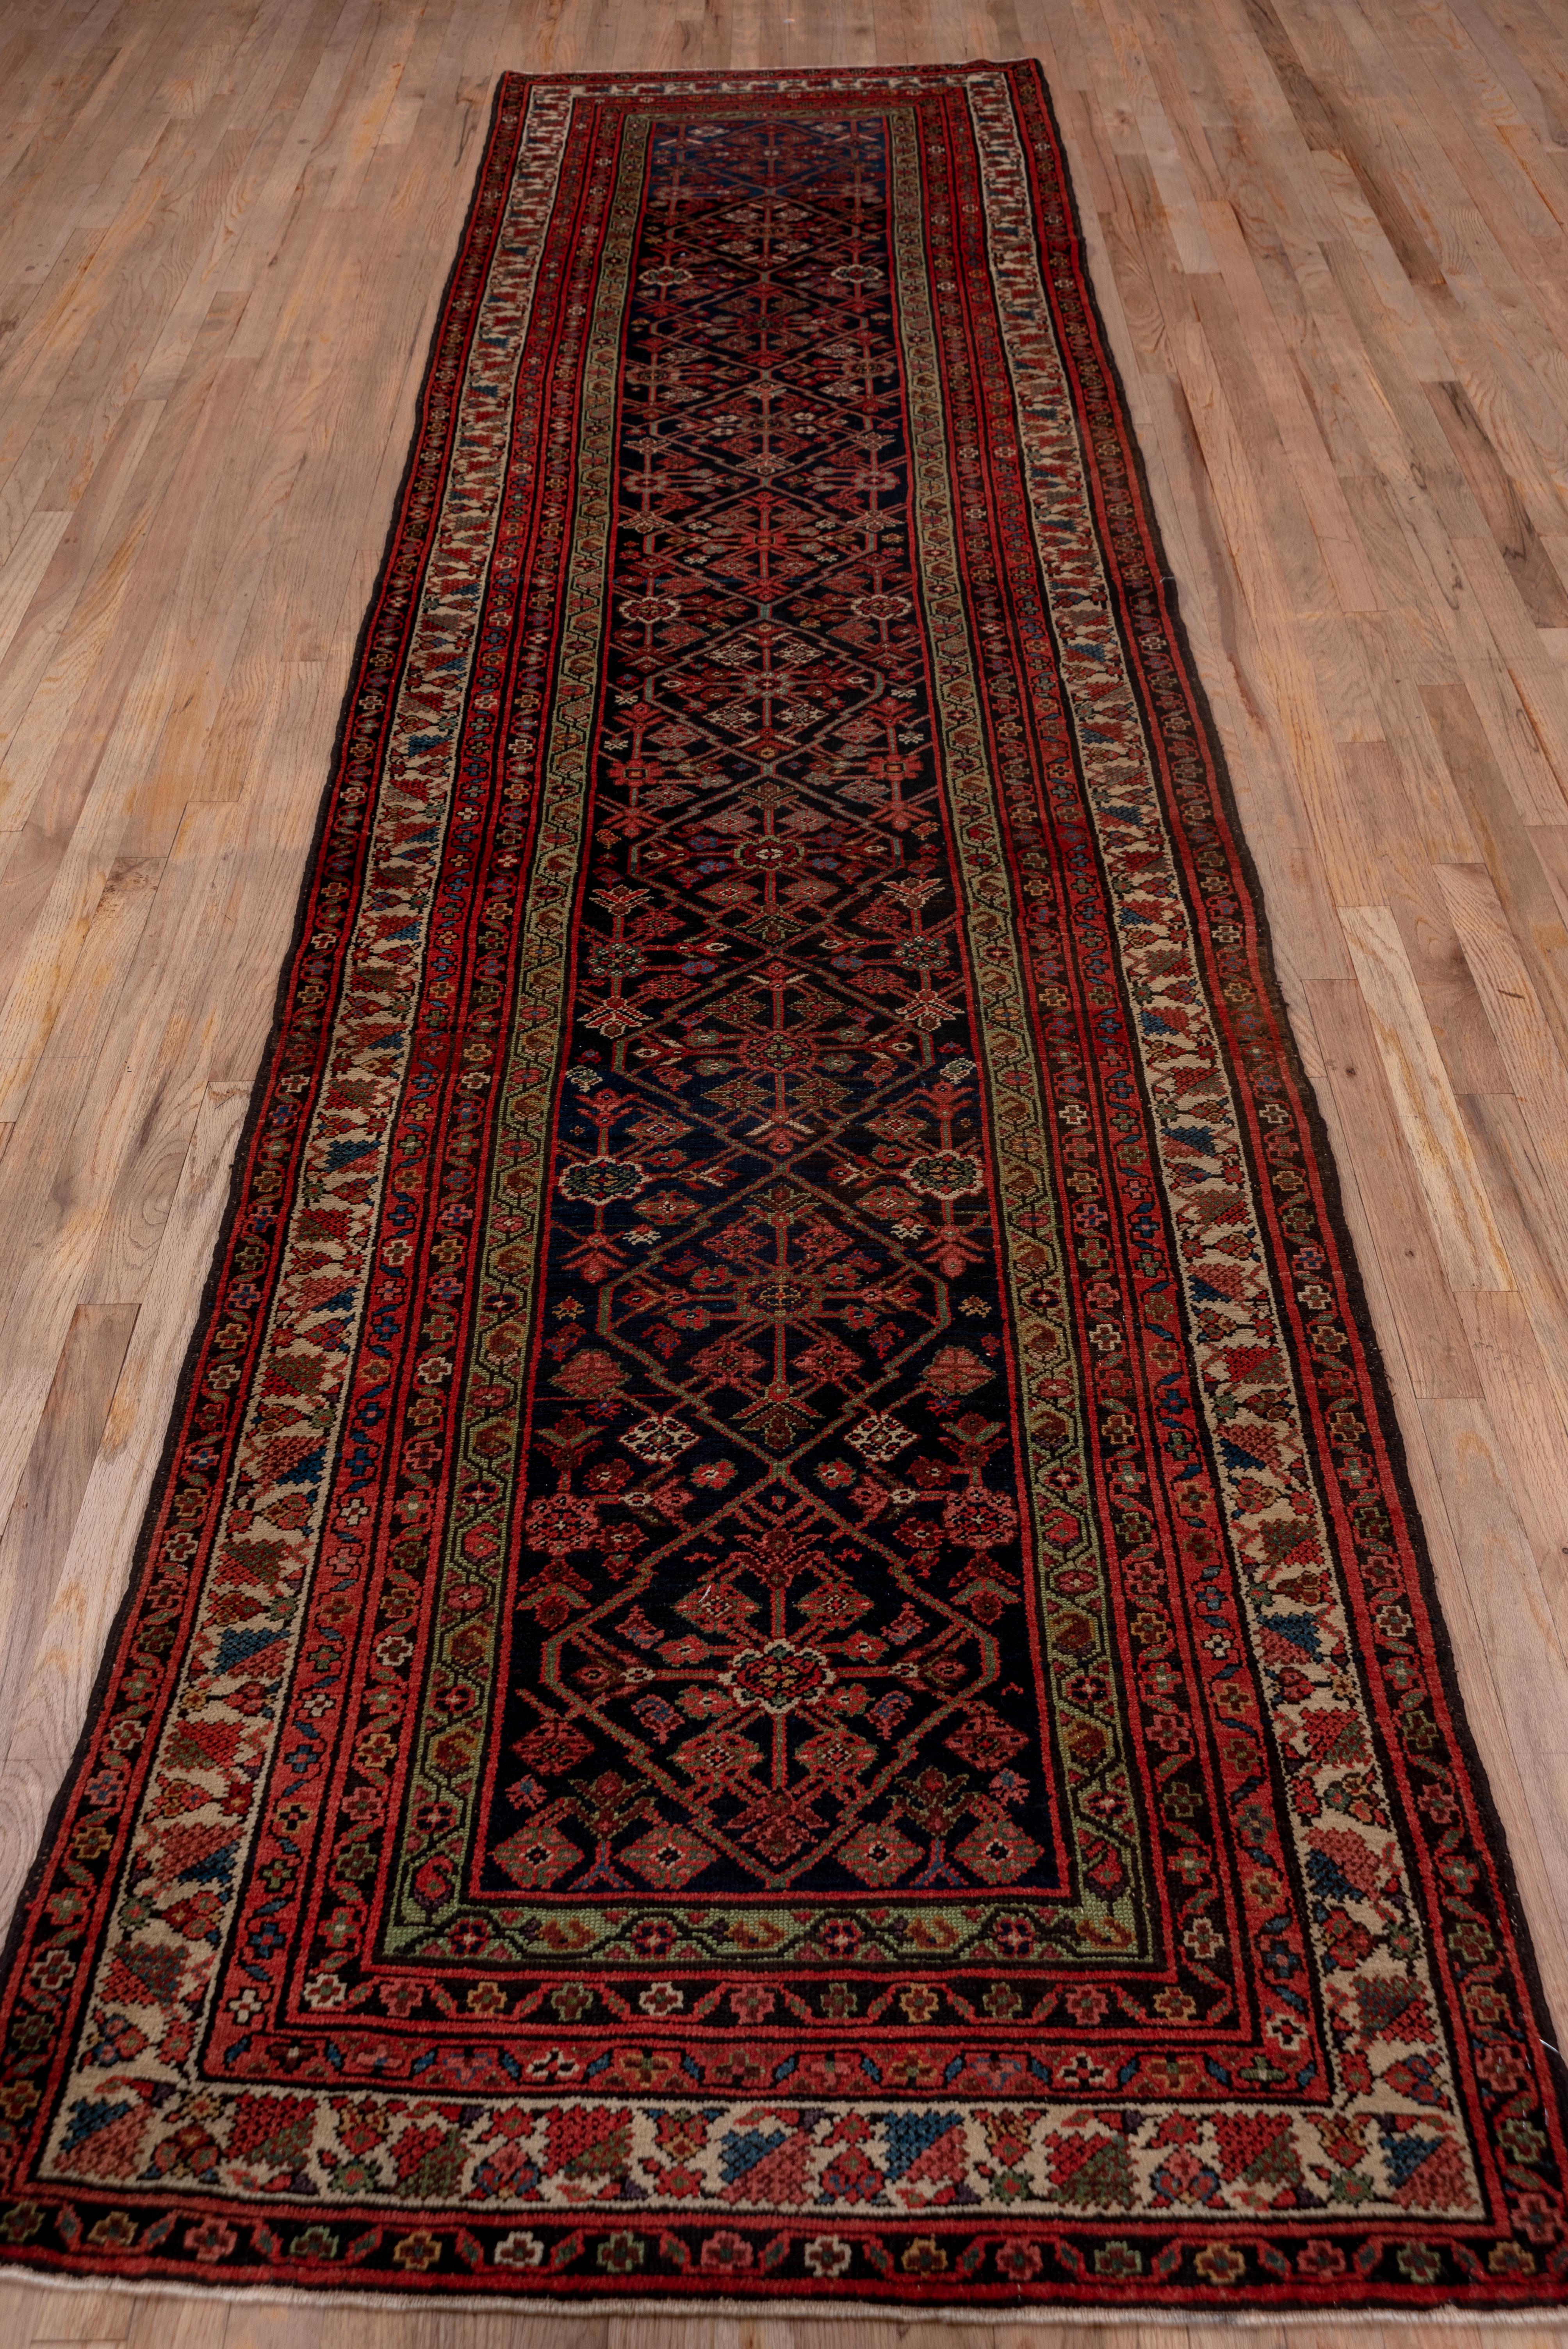 This west Persian village runner shows a navy ground supporting a skeletal connected lozenge pattern with central ivory rosettes. The ecru main border features square palmettes and standing small flowers.